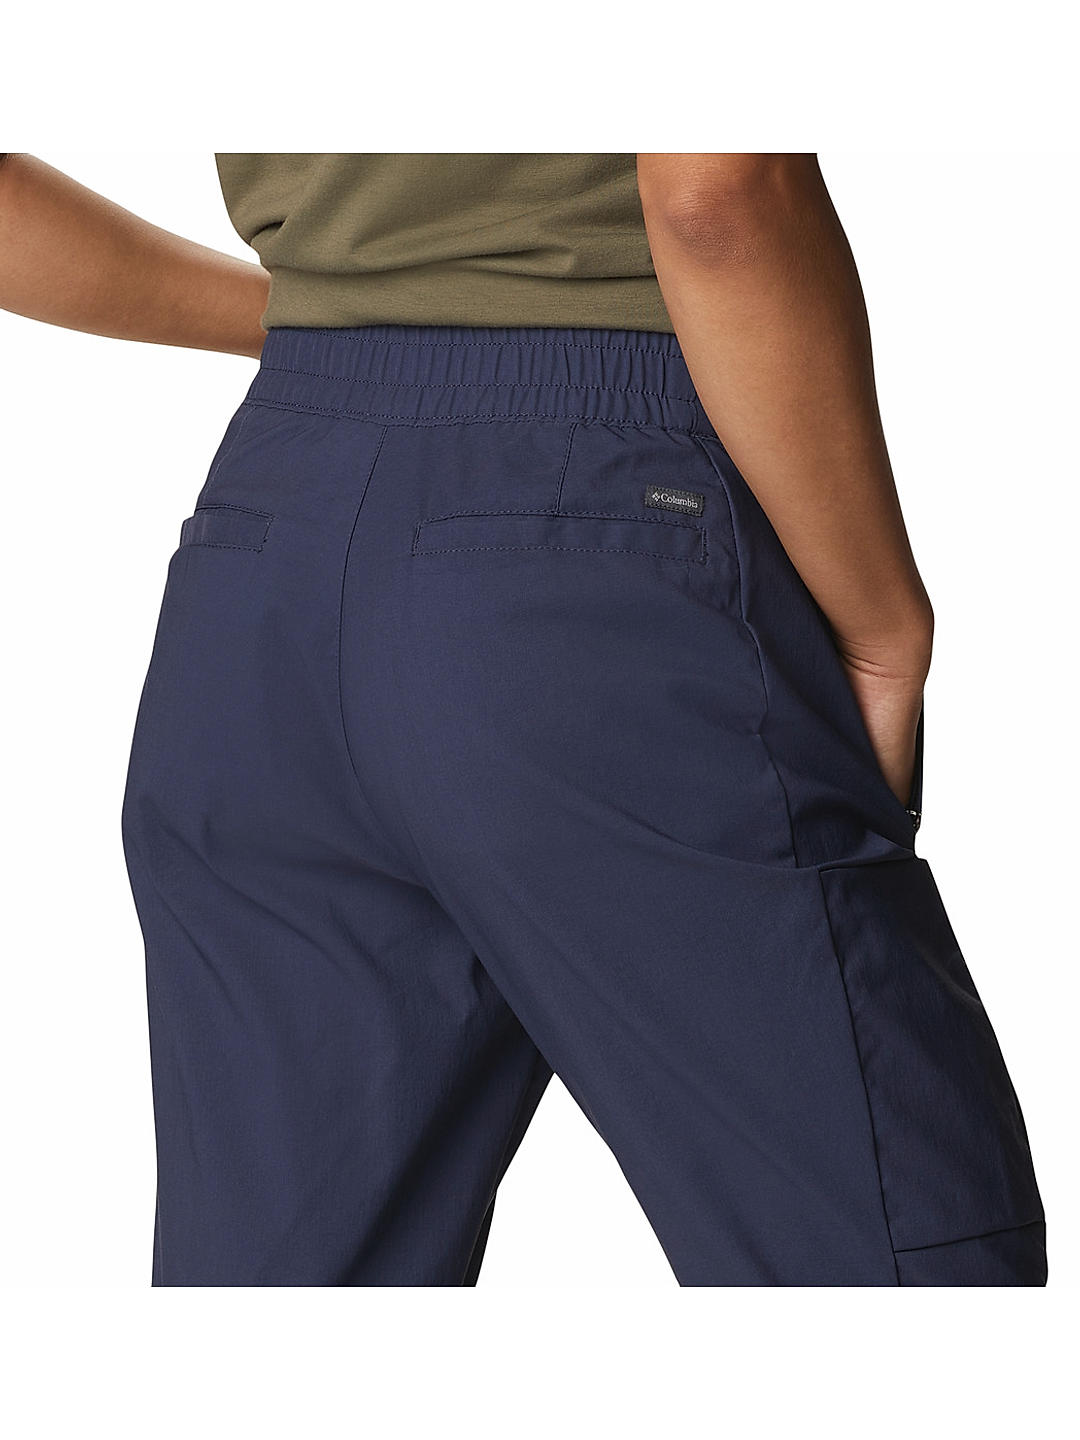 Buy Columbia Blue Passo Alto Pant For women Online at Adventuras  482904